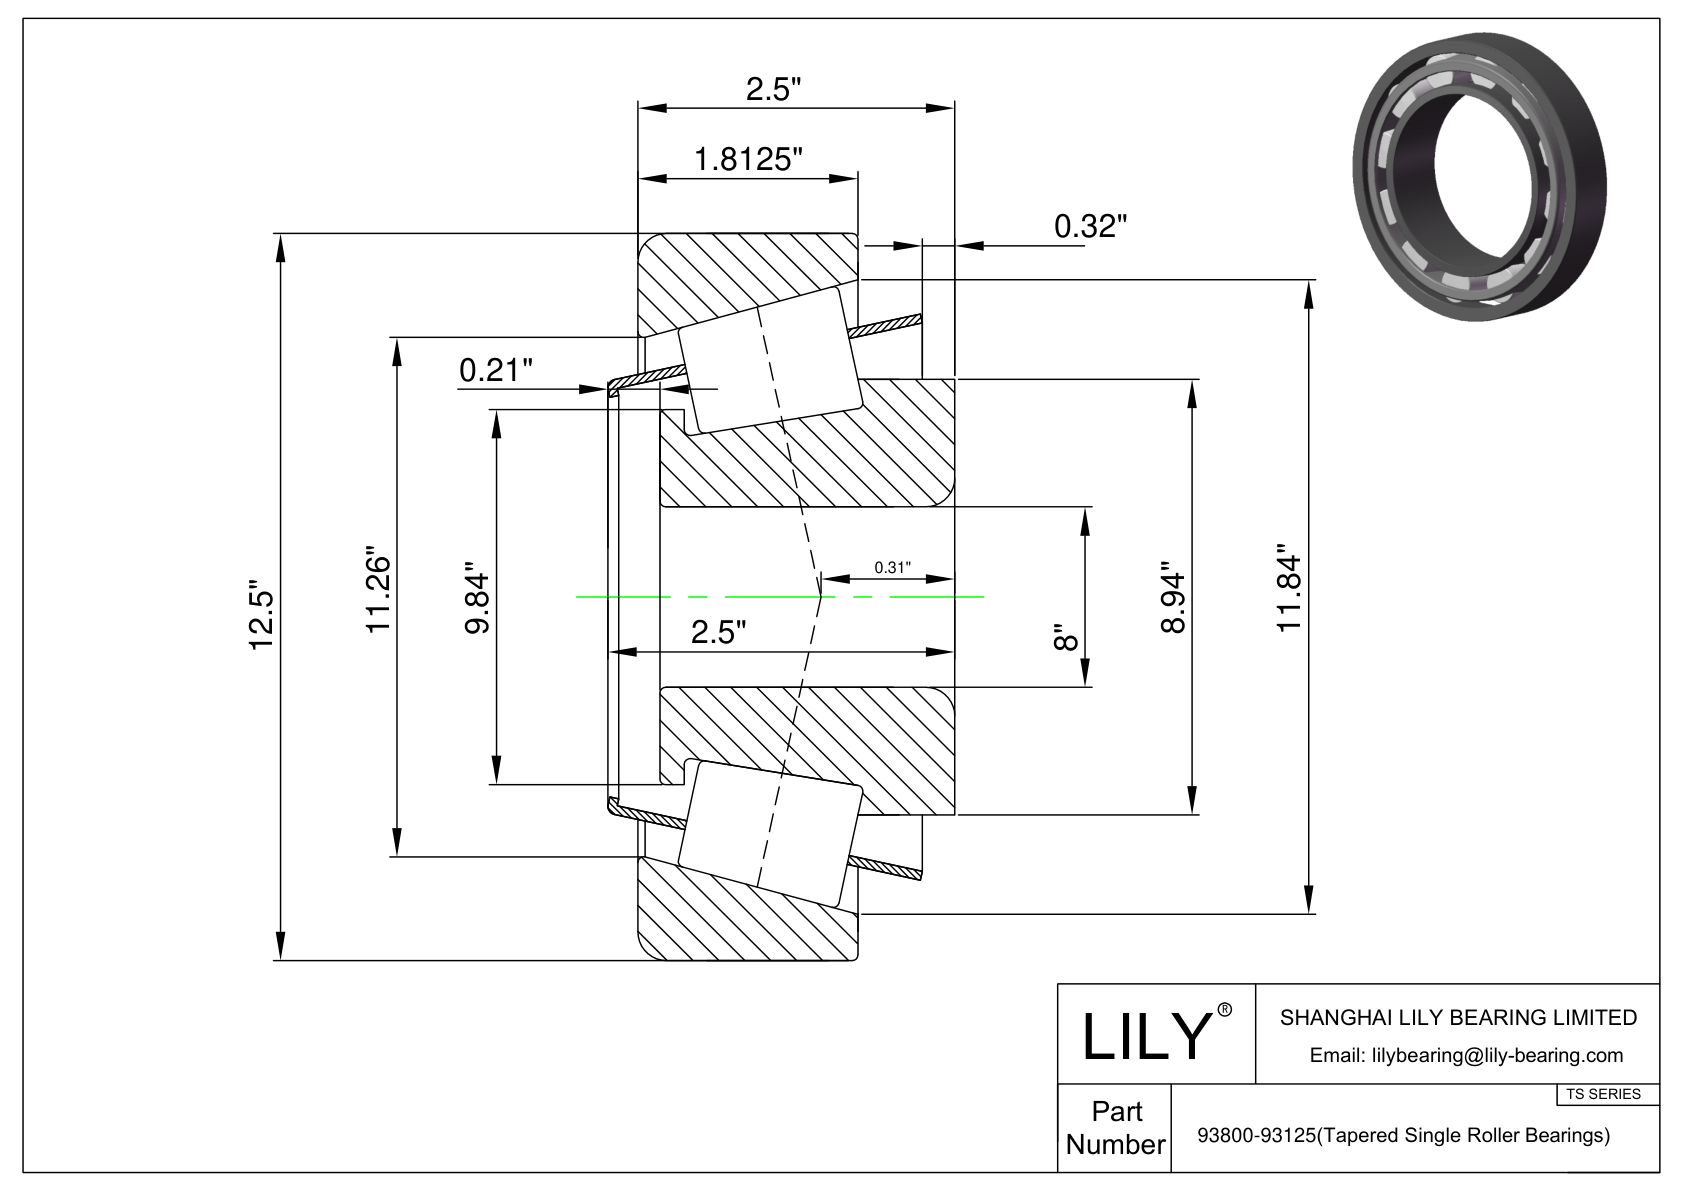 93800-93125 TS (Tapered Single Roller Bearings) (Imperial) cad drawing